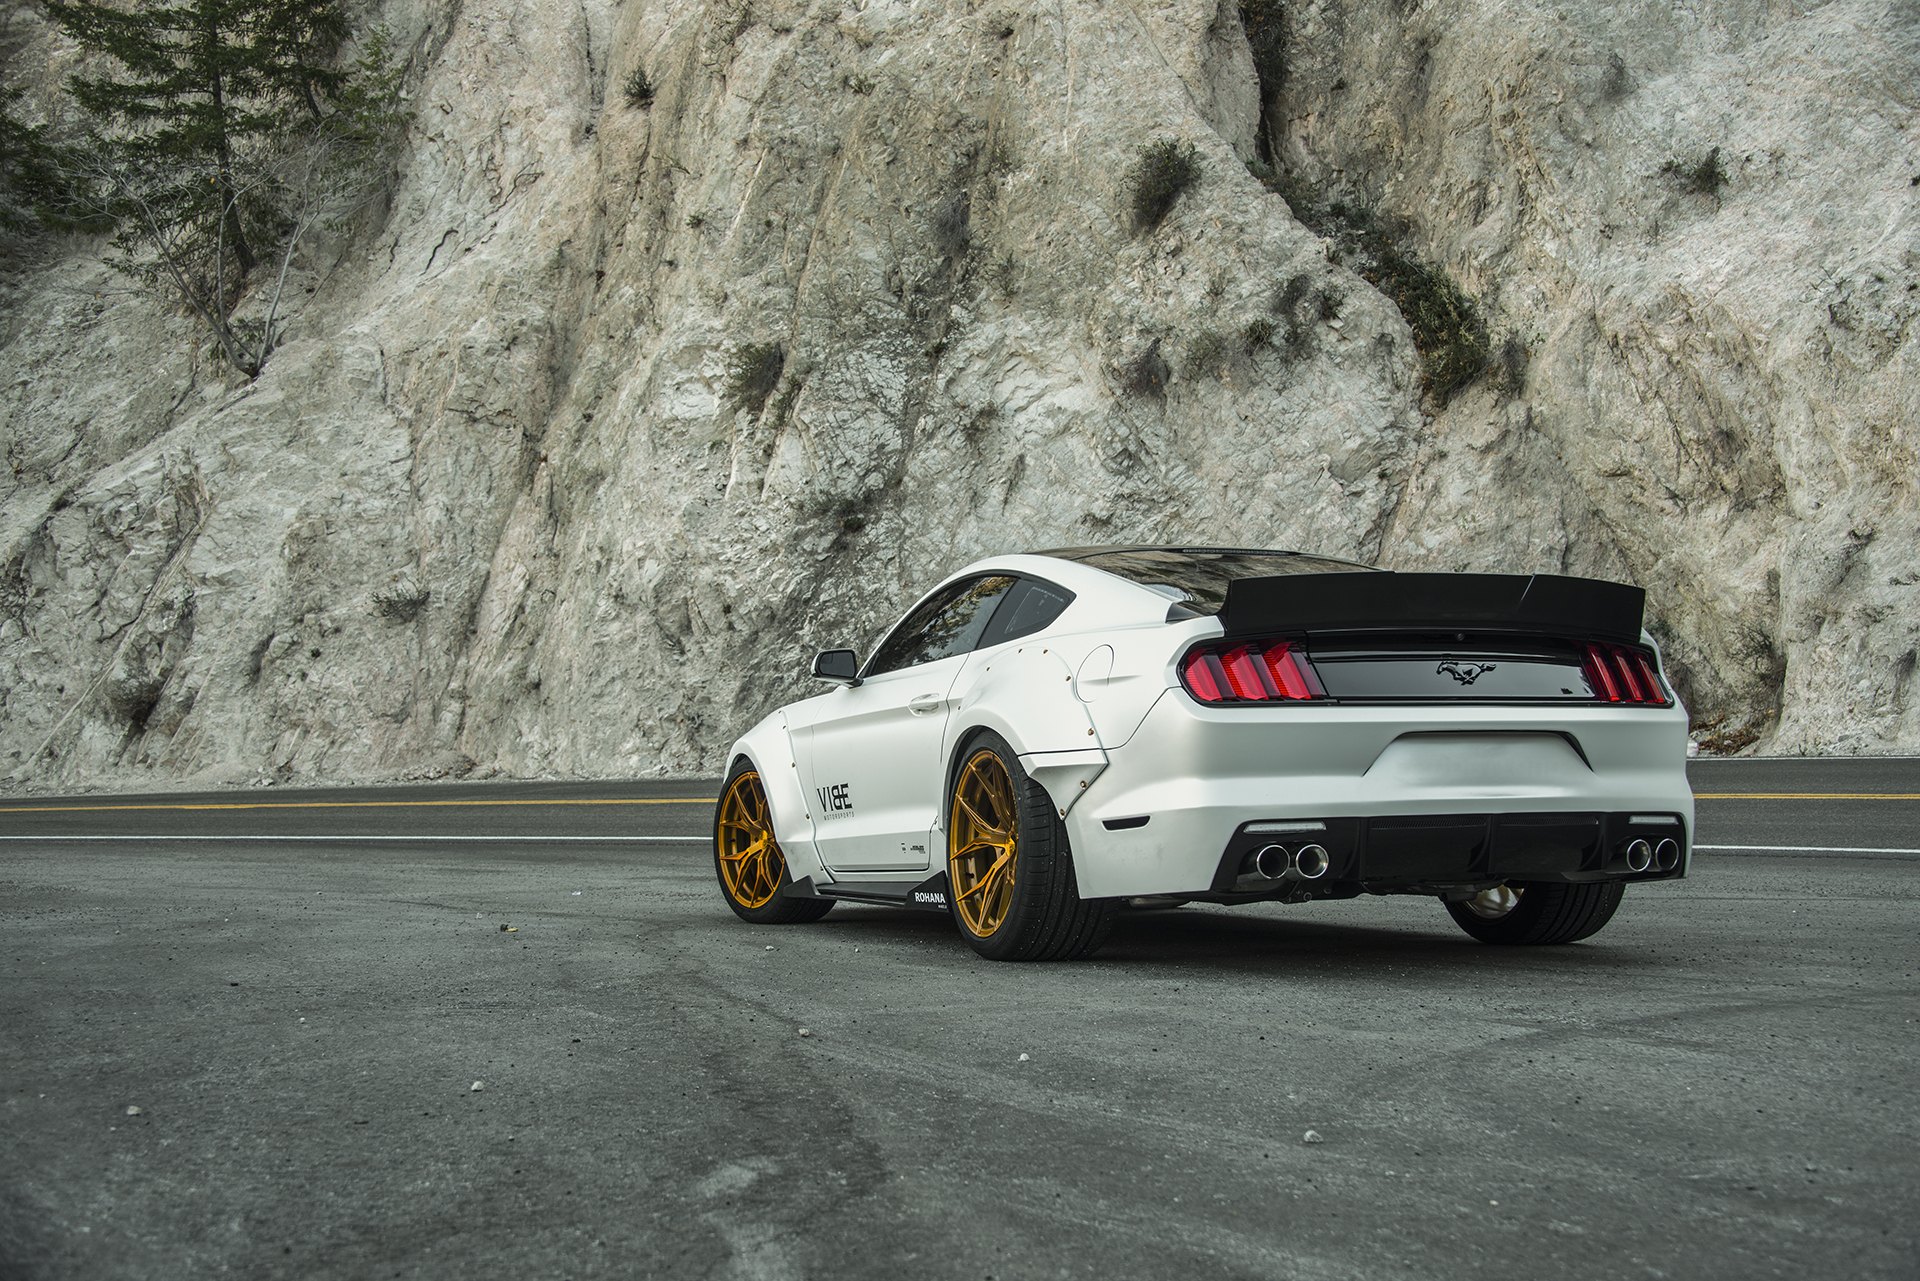 Widebody Ford Mustang S550 With Overfenders - Photo by Vibe Motorsports